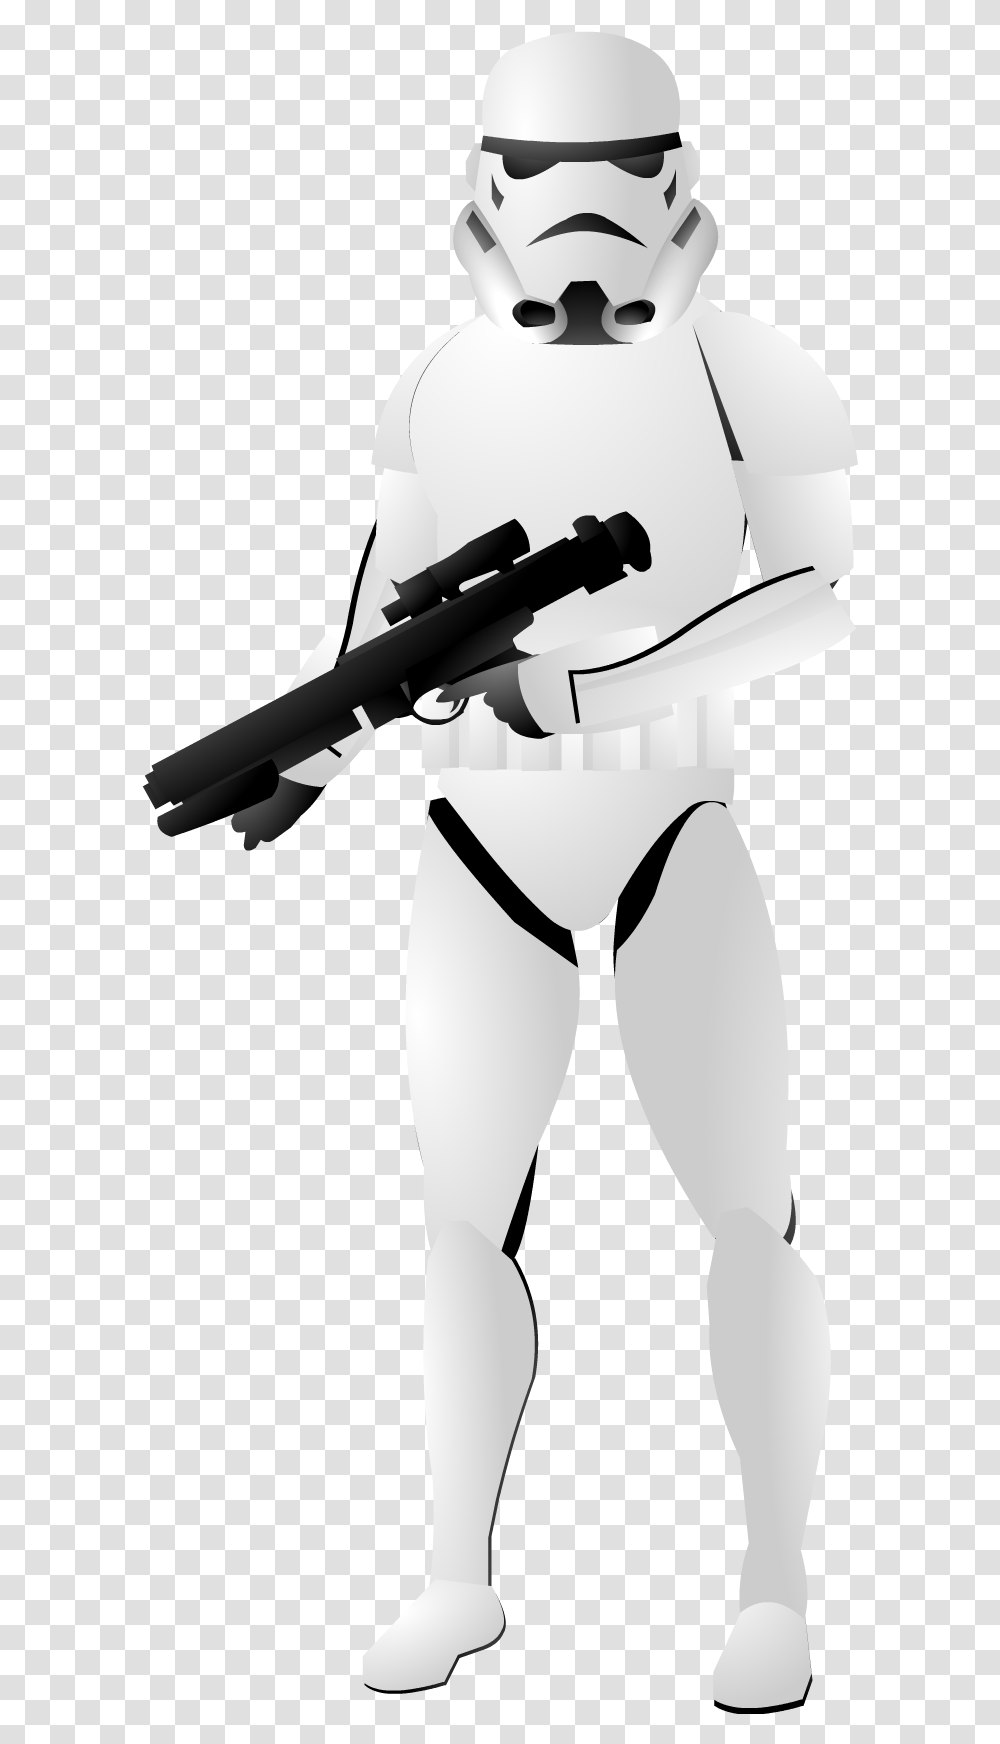 Stormtrooper Image For Free Download Stormtrooper Pose, Person, Musical Instrument, Leisure Activities, Musician Transparent Png